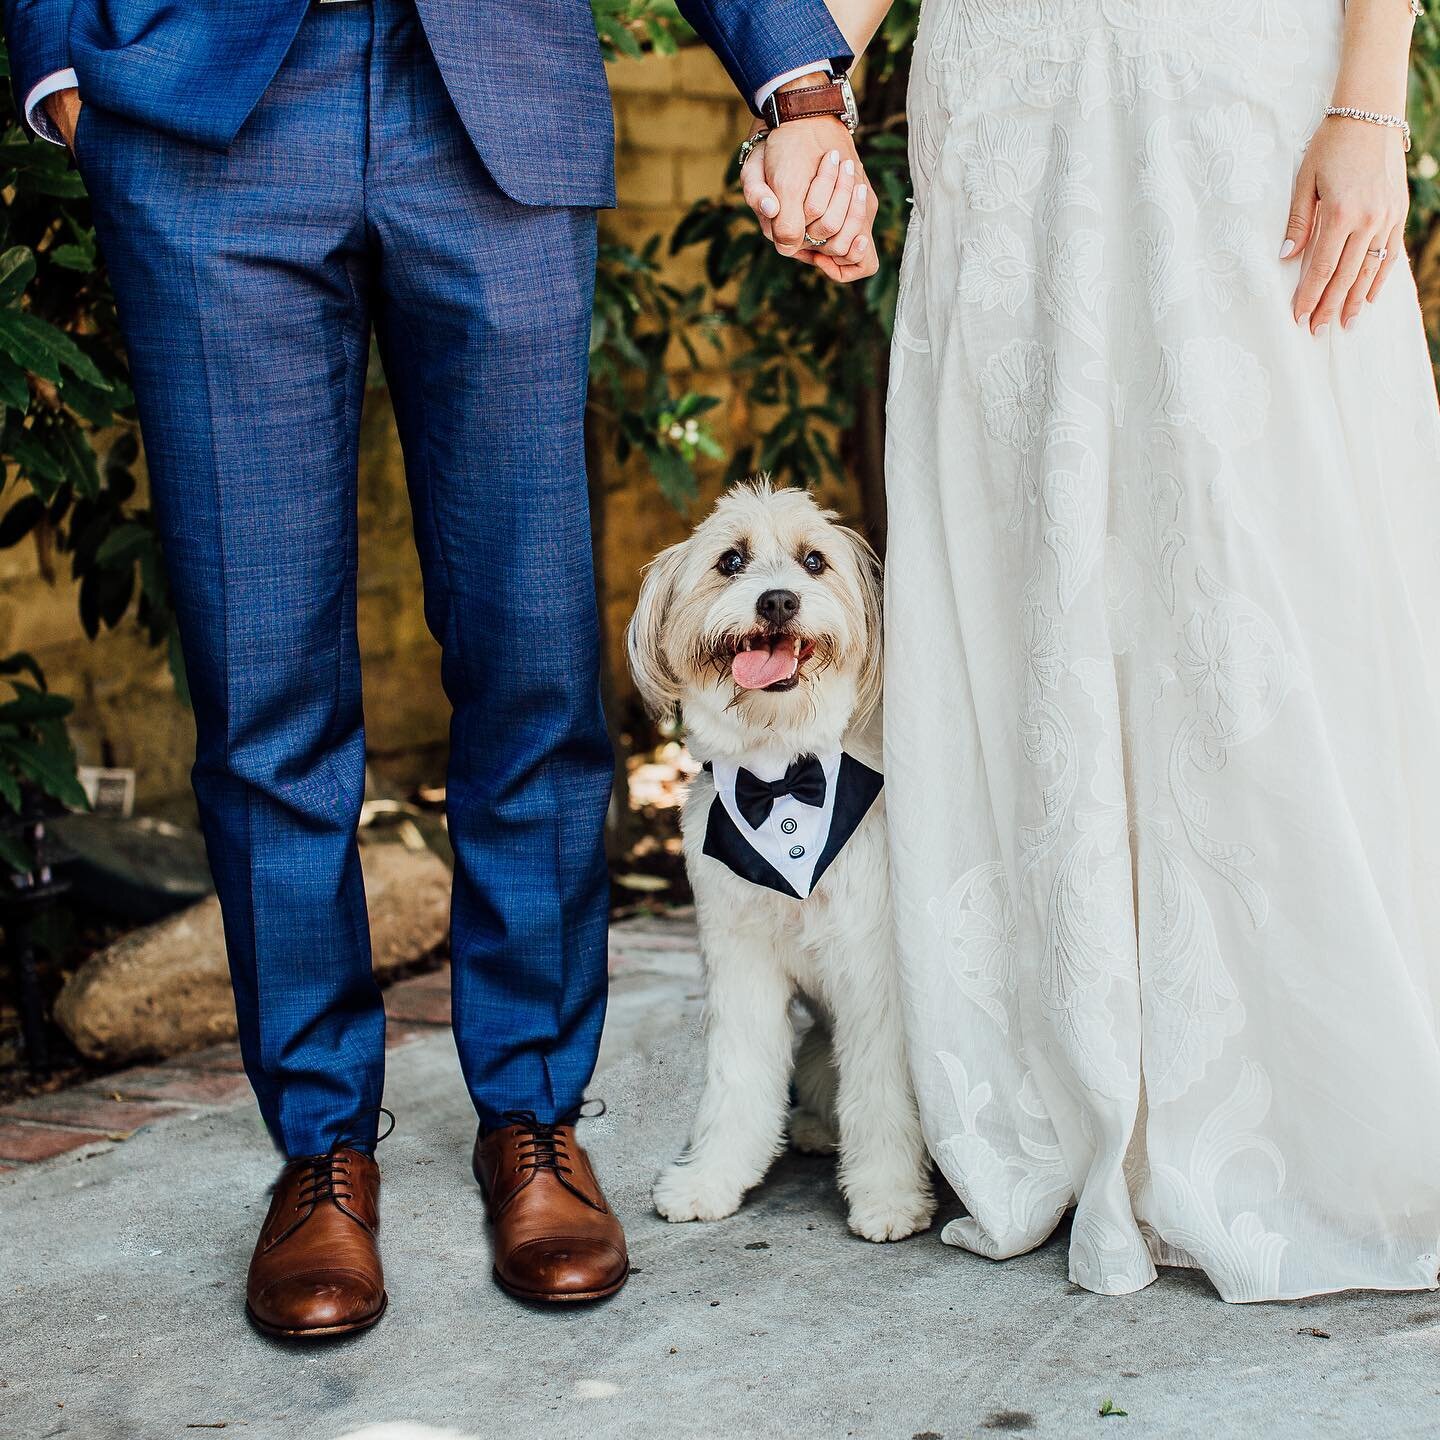 Happy International Dog Day!! We love it when our couples decide to incorporate their fur babies on their special day 💕🐶
 
📋 || @weddingswithangie 
📷 || @wildwhim 

#internationaldogday #furbabies #weddingfamilyportraits #santabarbaraweddings #we